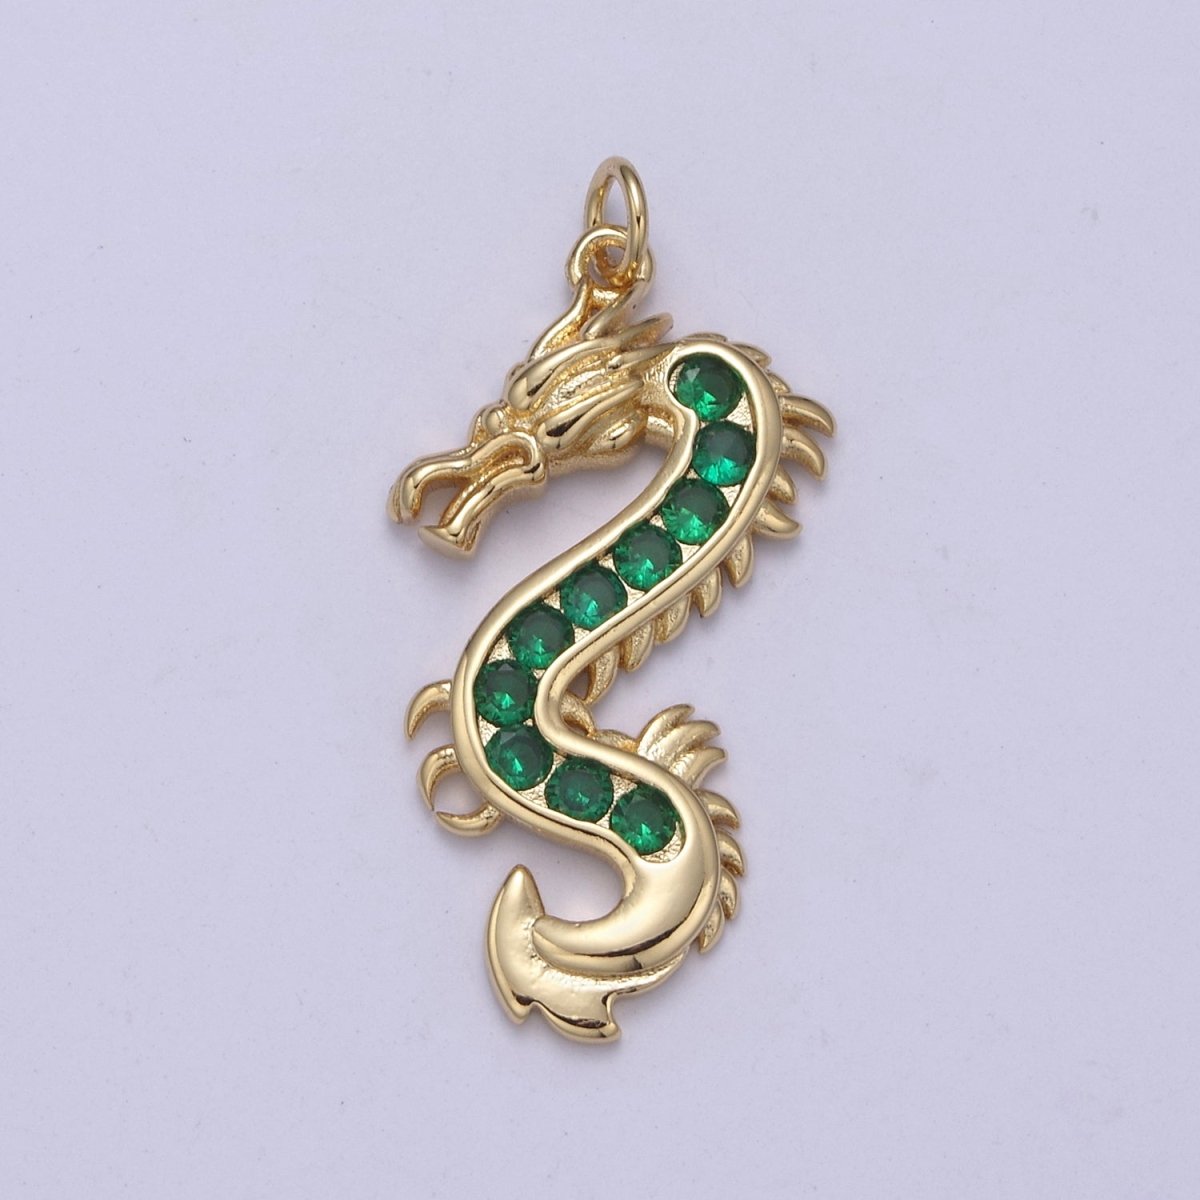 Mystical Dragon Pendant in 24K Gold Filled Animal Charm Cubic Zirconia Necklace Pendant N-406 - N-408 - DLUXCA